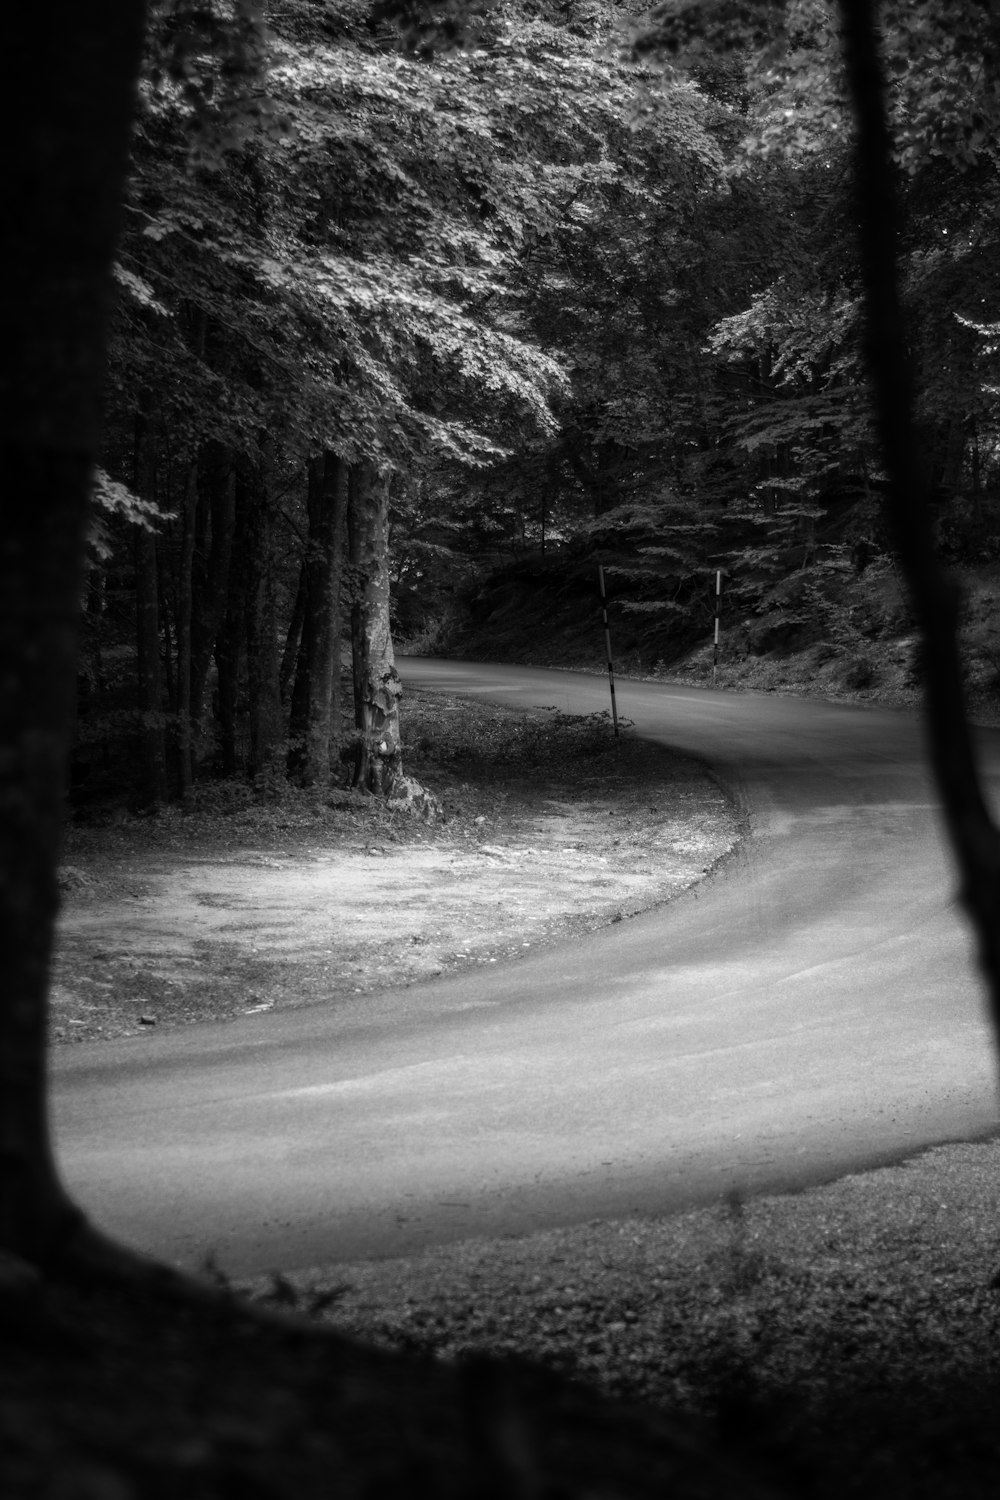 grayscale photo of road in between trees